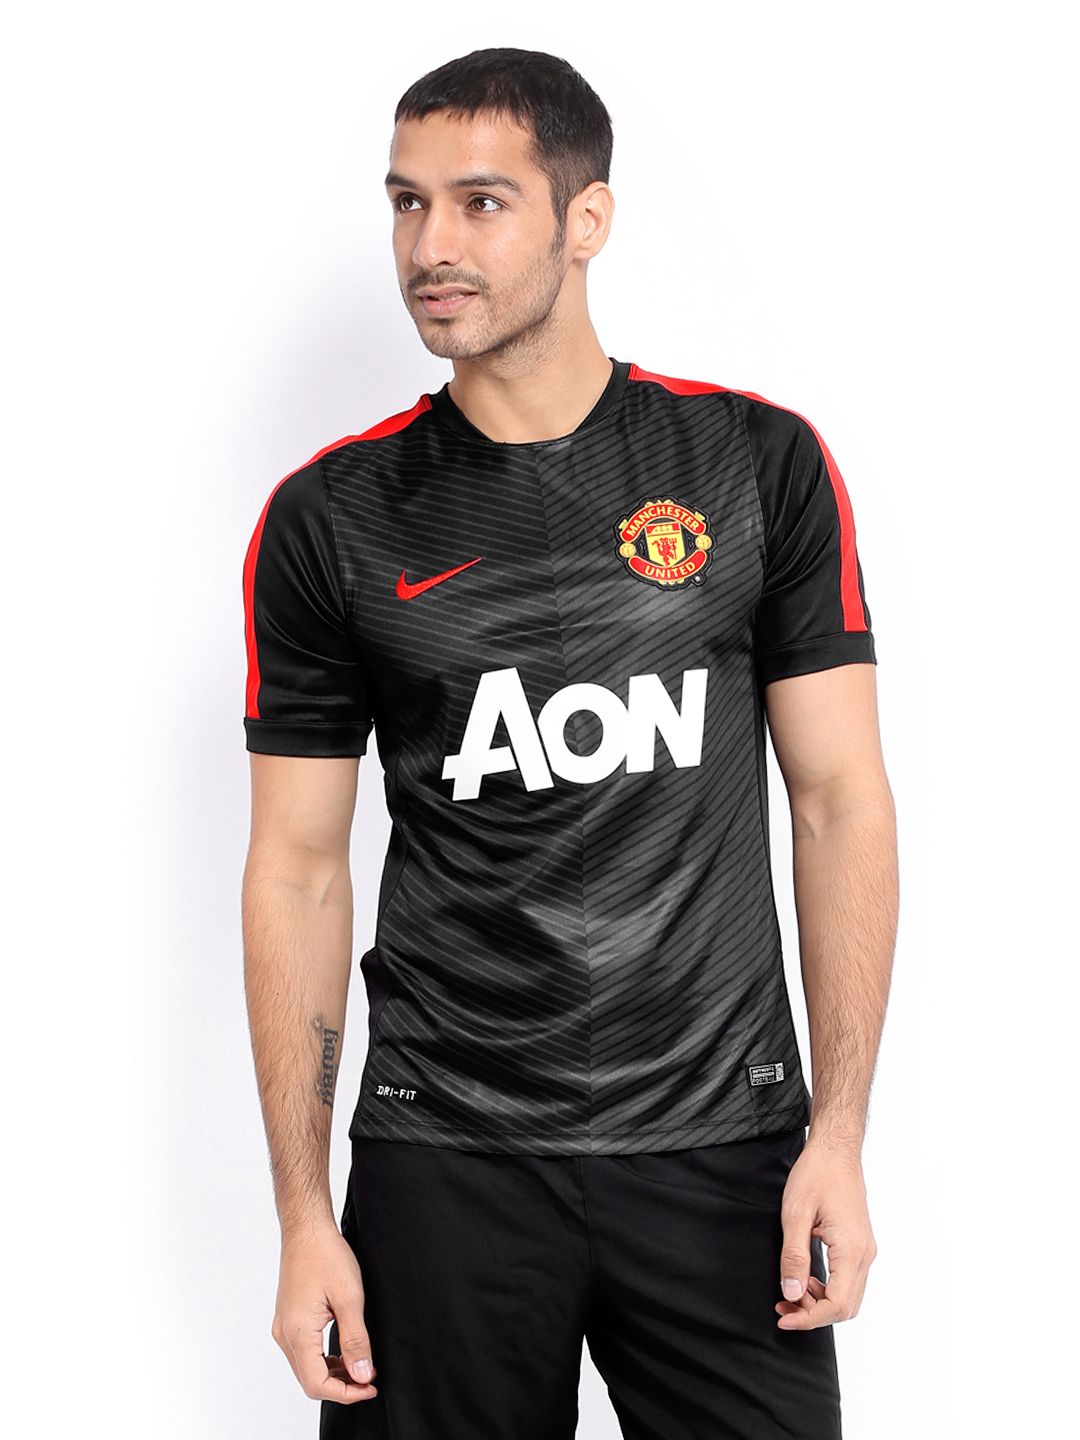 buy manchester united jersey india